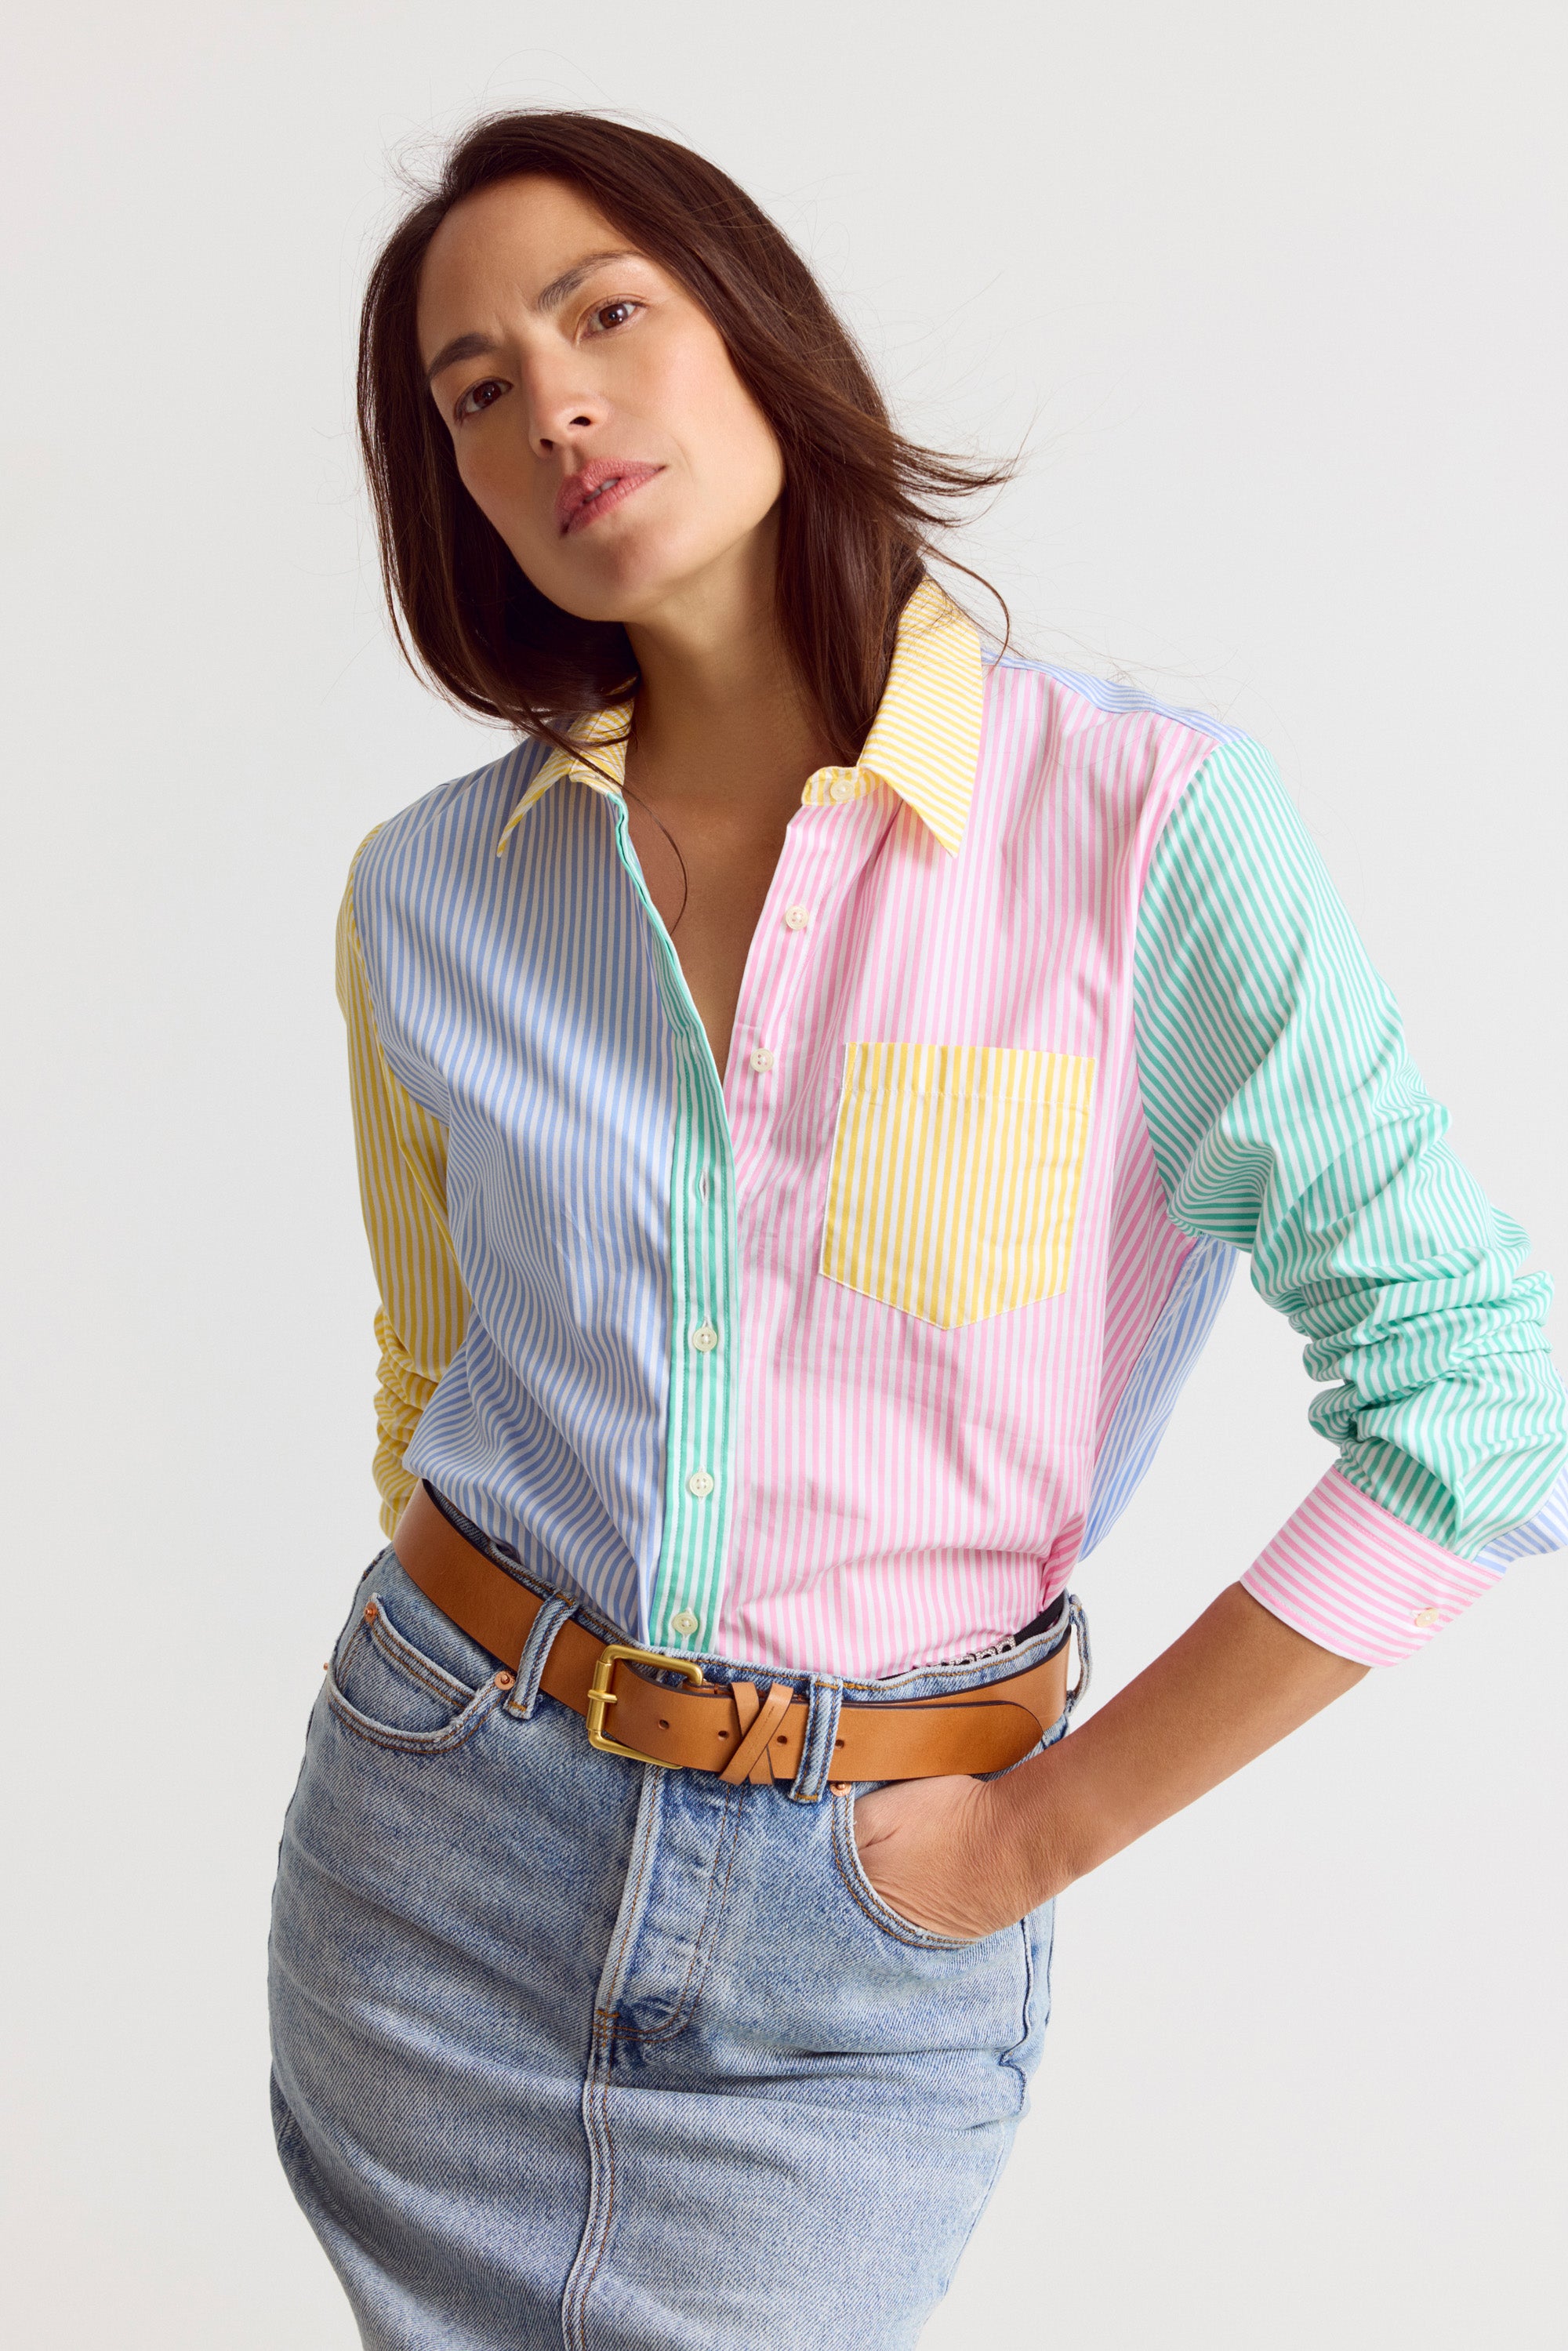 The Shirt by Rochelle Behrens - THE BOYFRIEND SHIRT IN MULTICOLOR ...